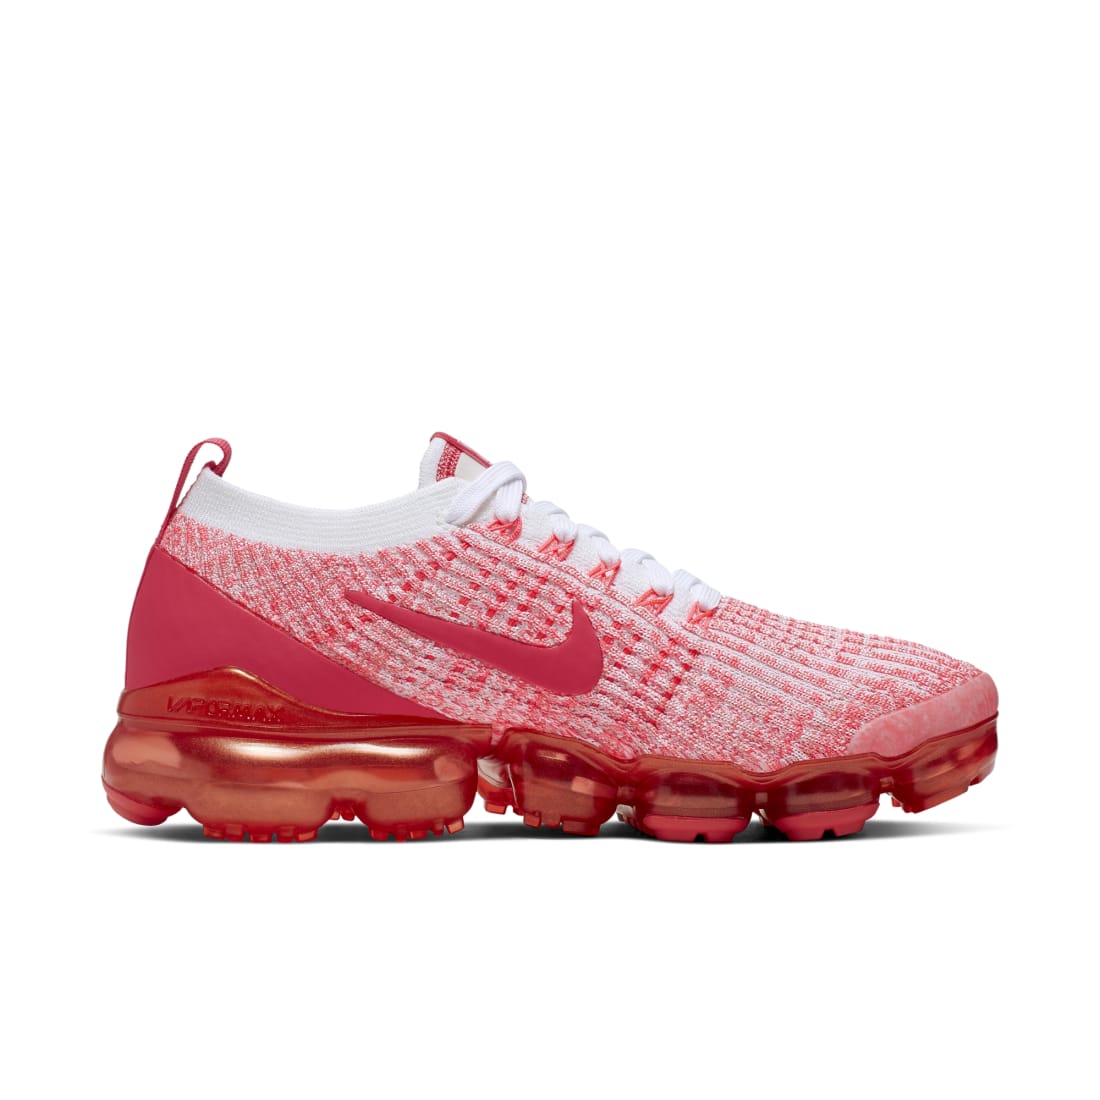 when did vapormax flyknit 3 come out